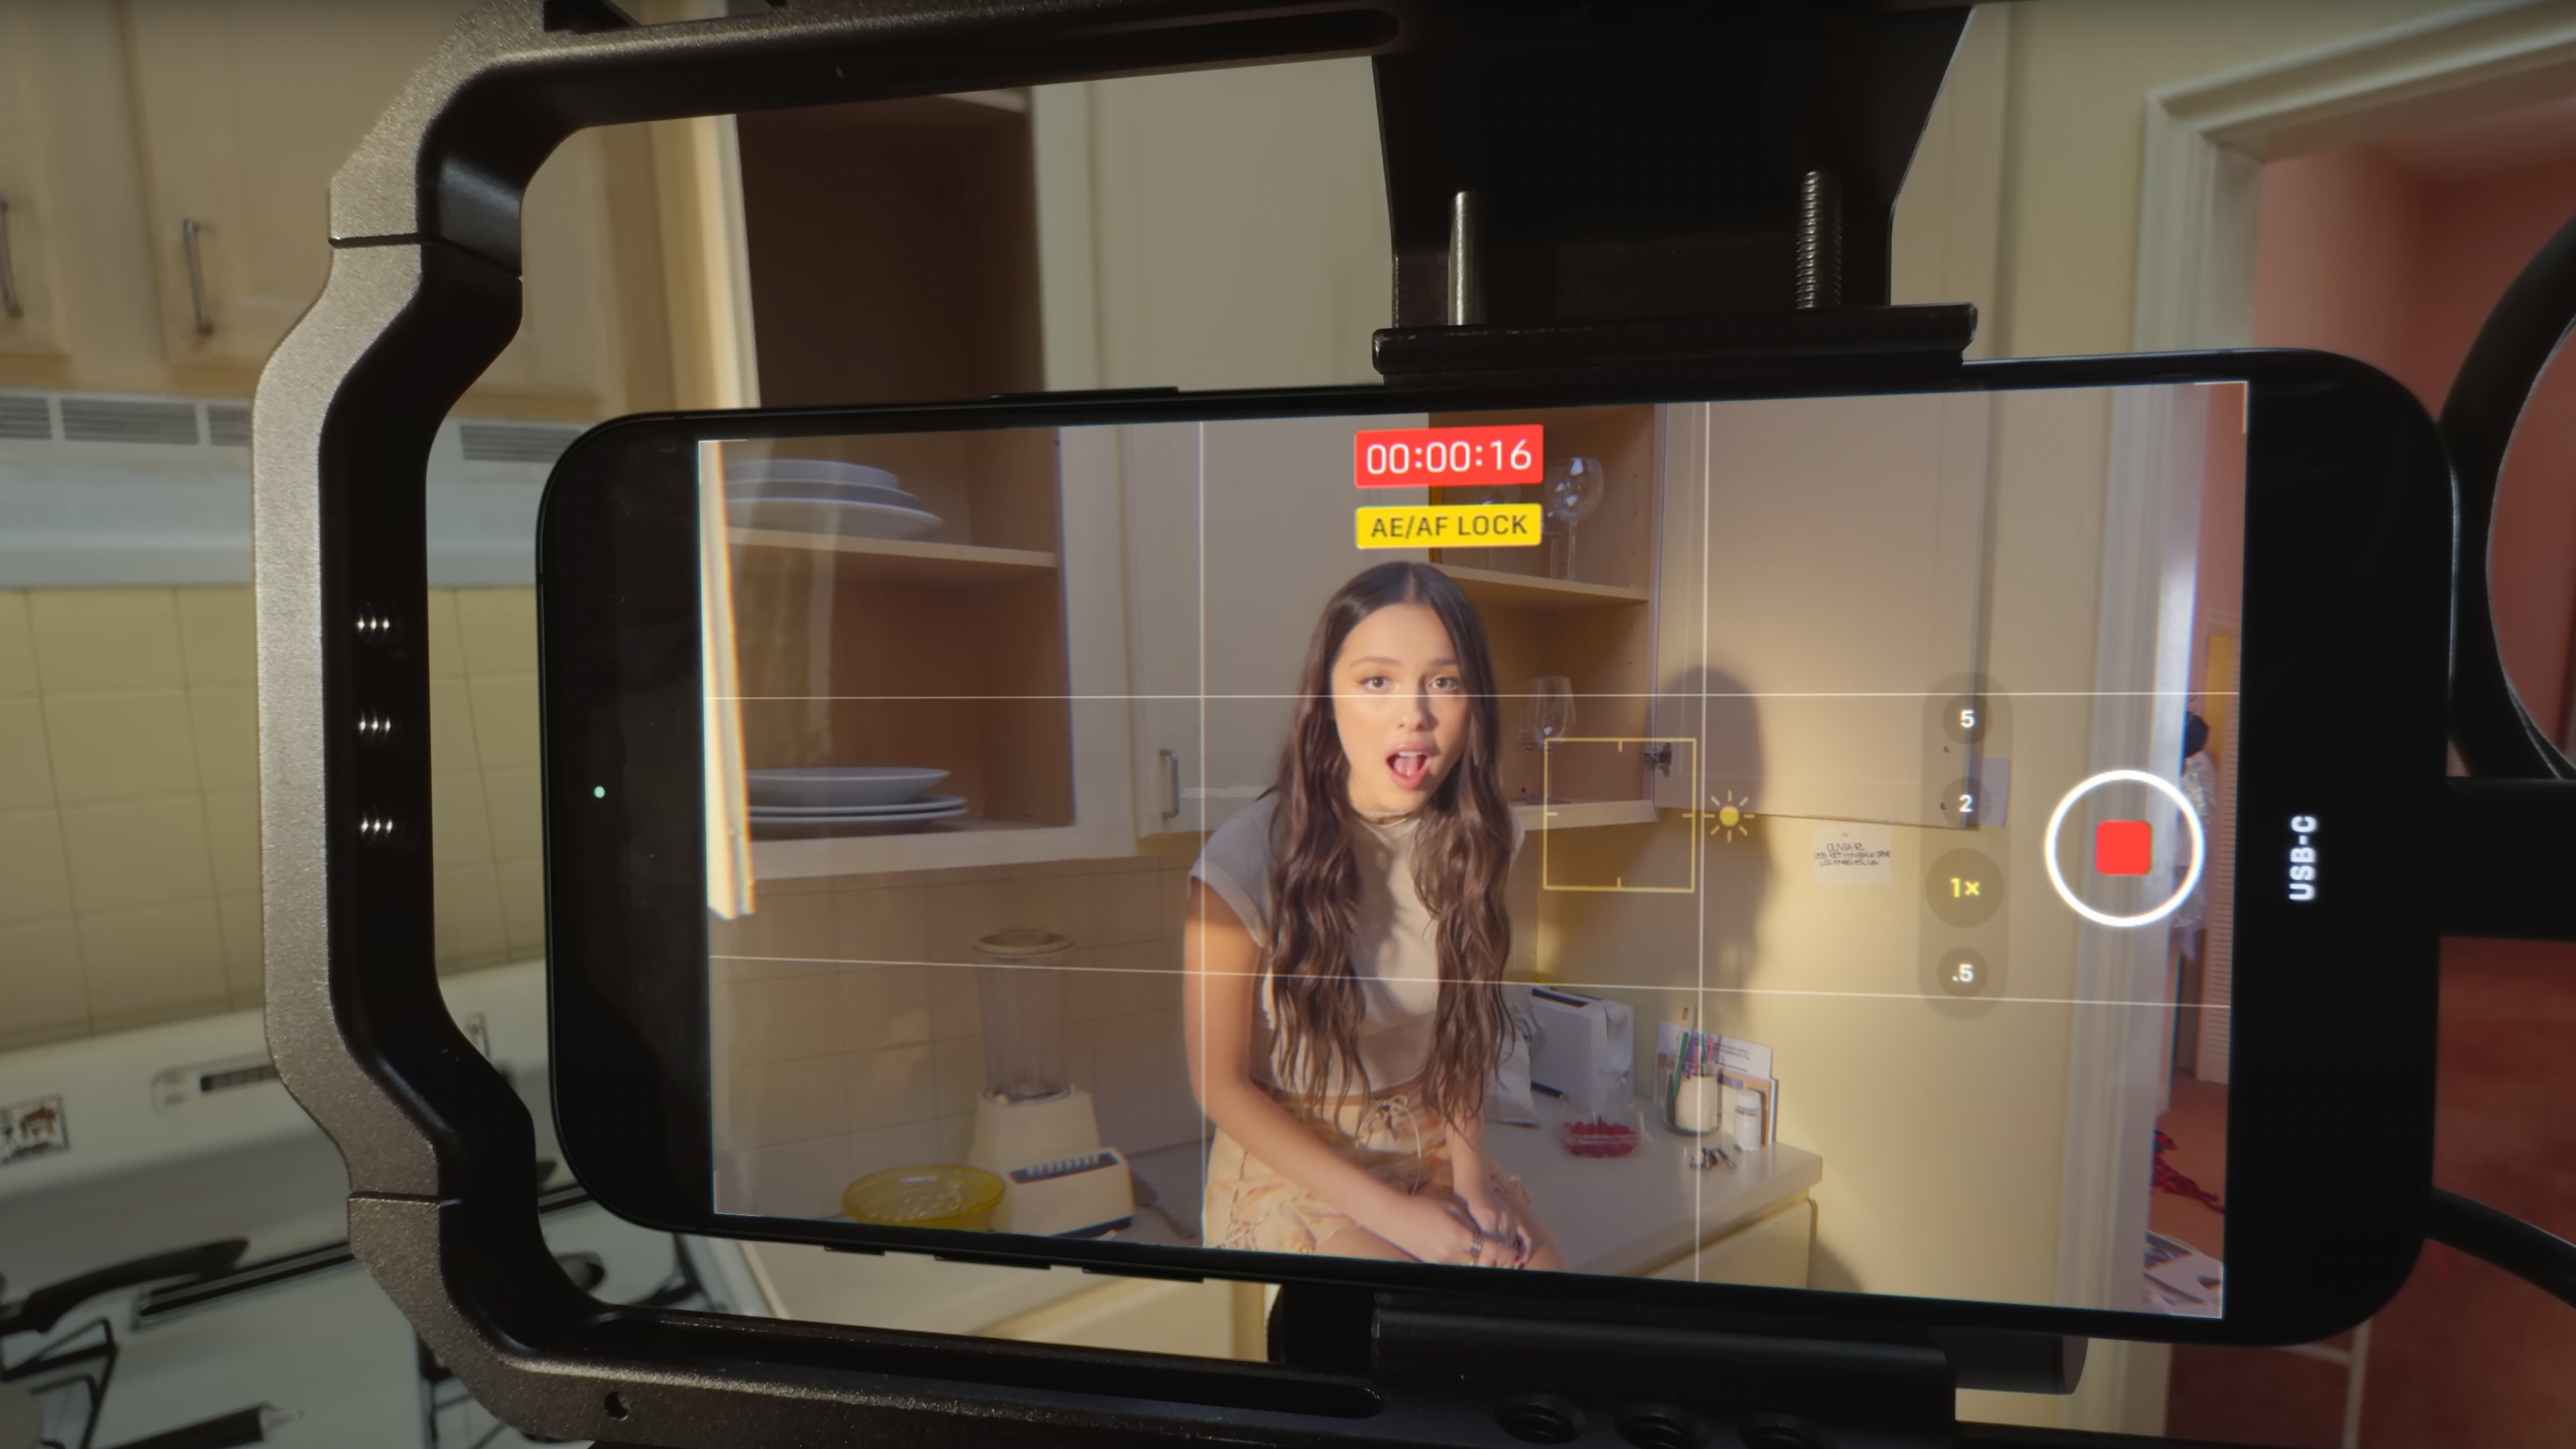 The iPhone 15 Pro being used in an Olivia Rodrigo music video